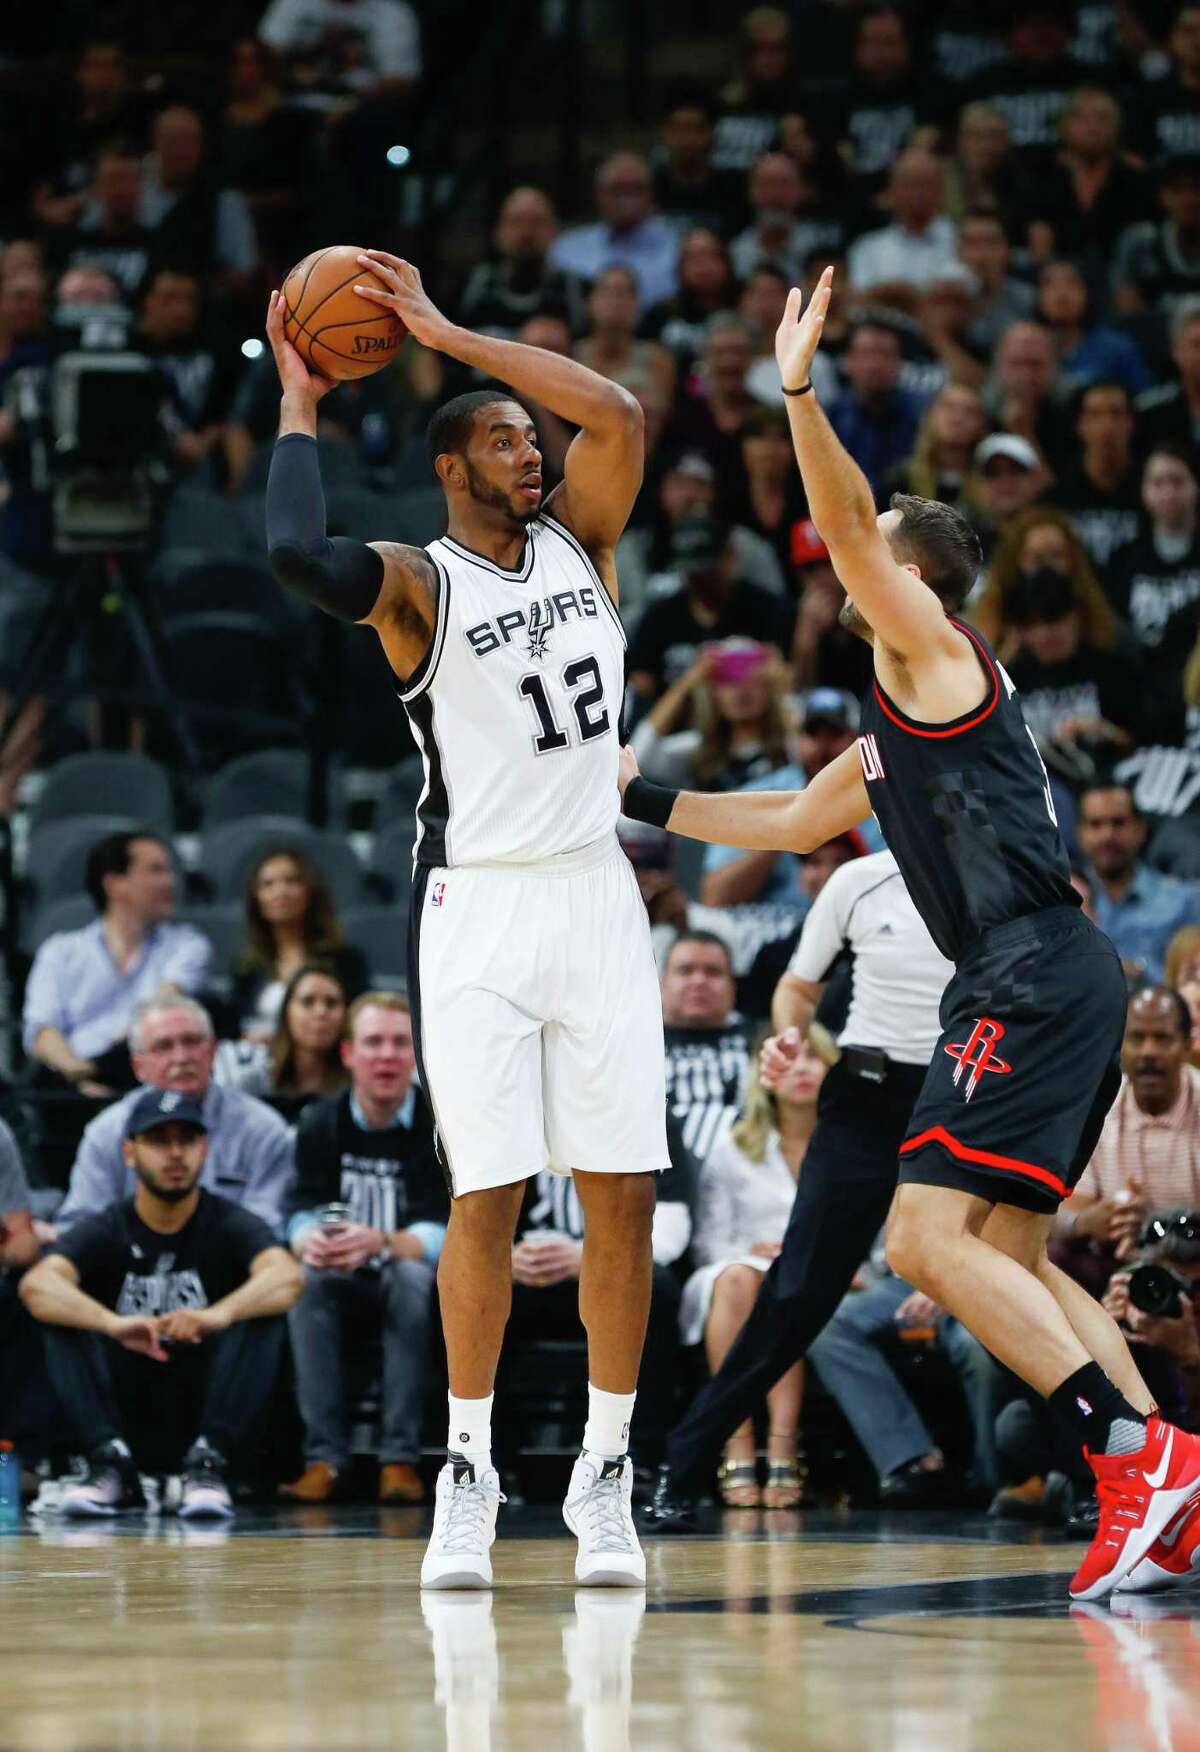 Spurs forward LaMarcus Aldridge is guarded by Houston Rockets forward Ryan Anderson during the first half of Game 1 at the AT&T Center on May 1, 2017, in San Antonio.